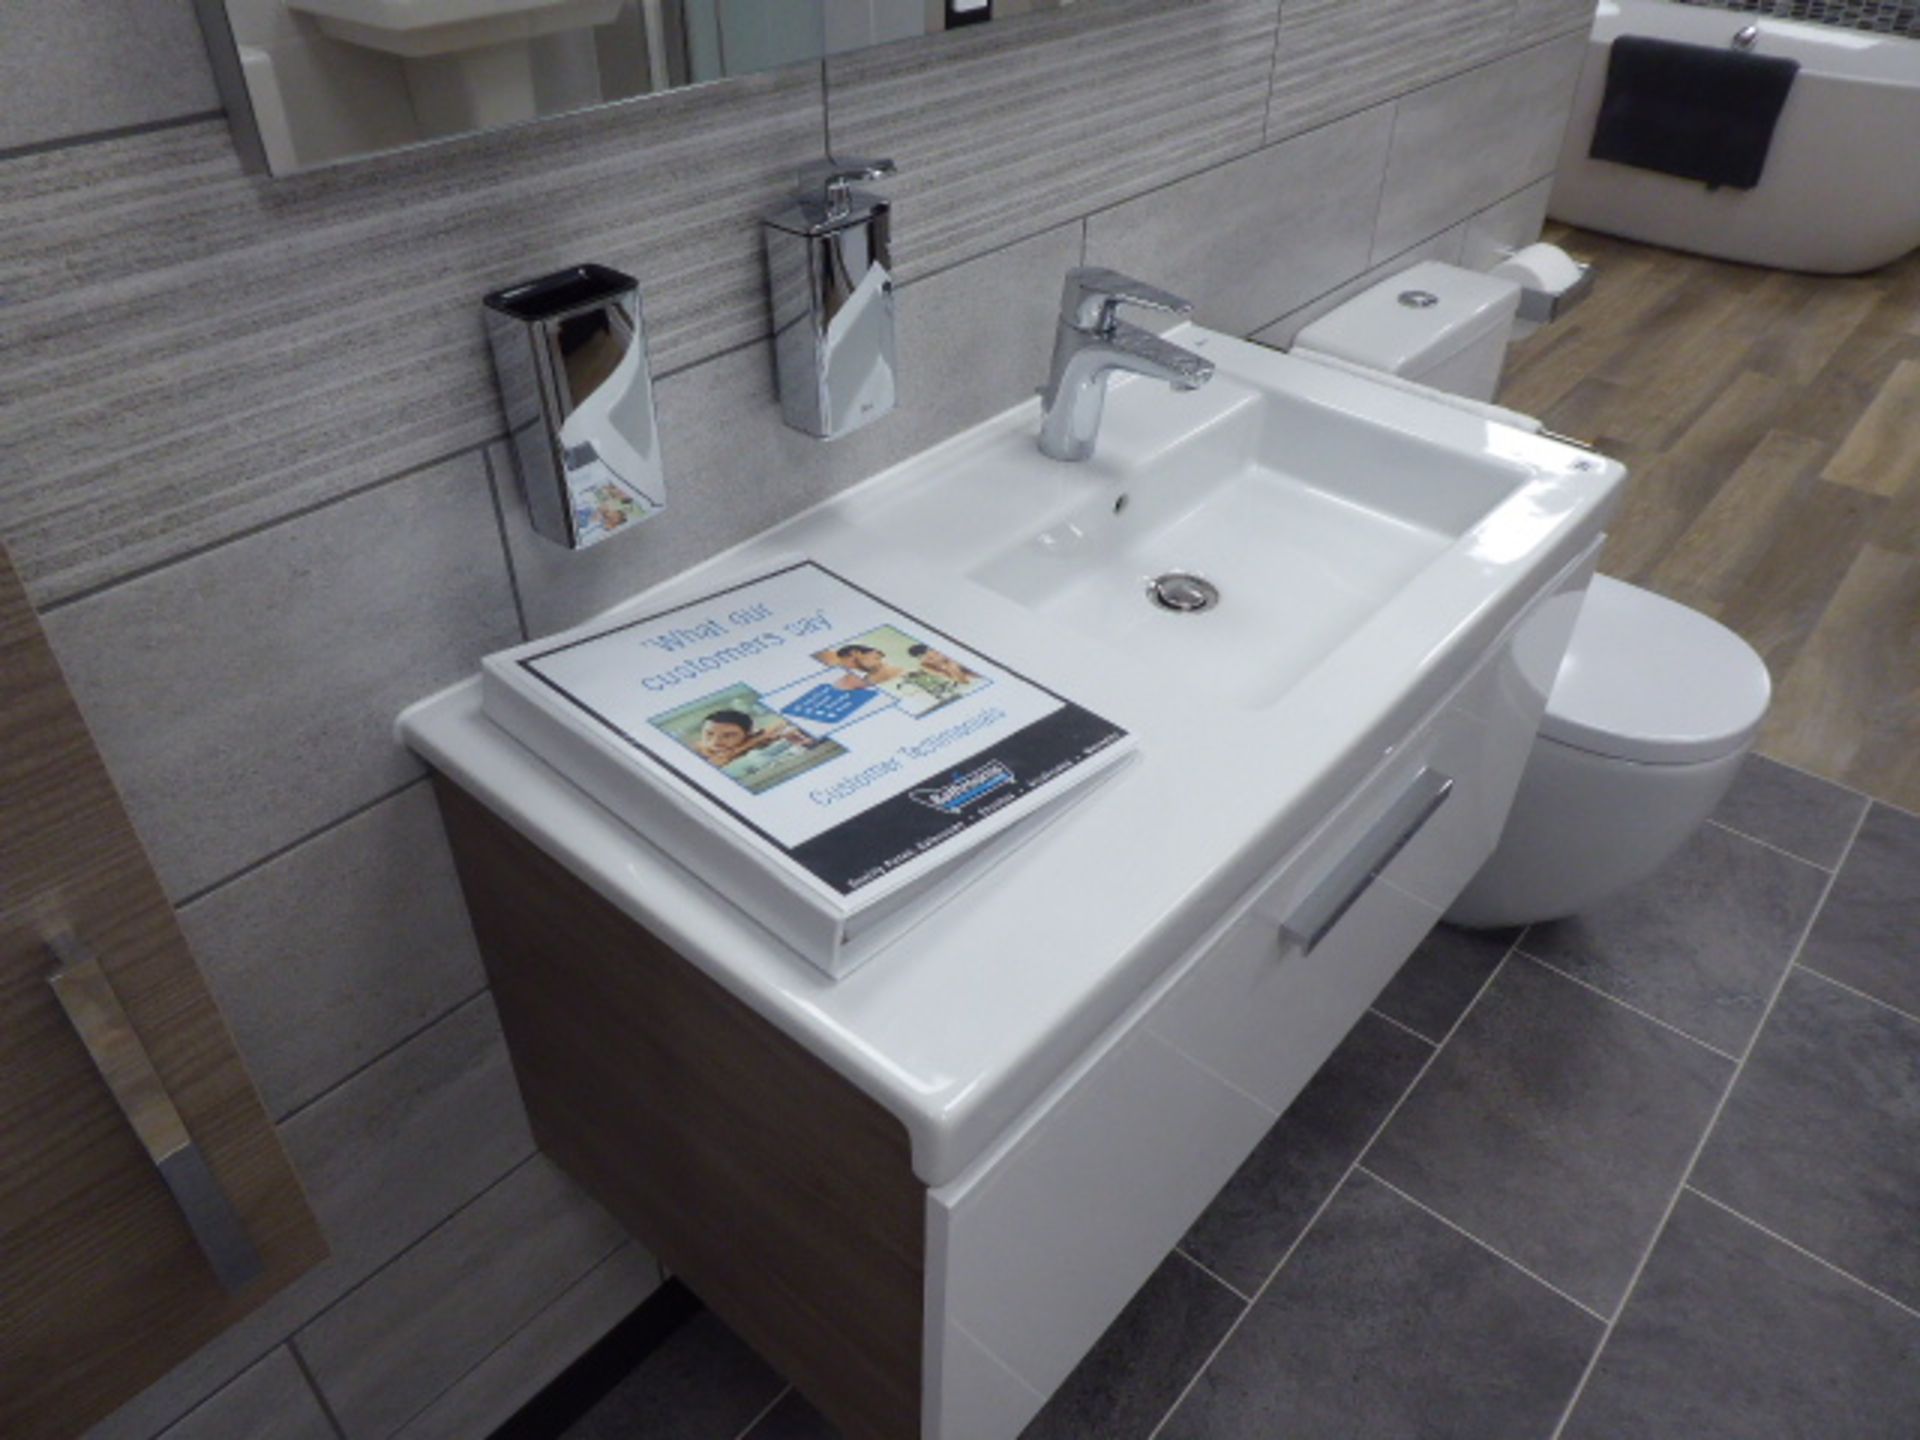 Roca Meridian-N cloakroom suite with toilet, single hand basin and drainer with tap set on wall - Image 5 of 7